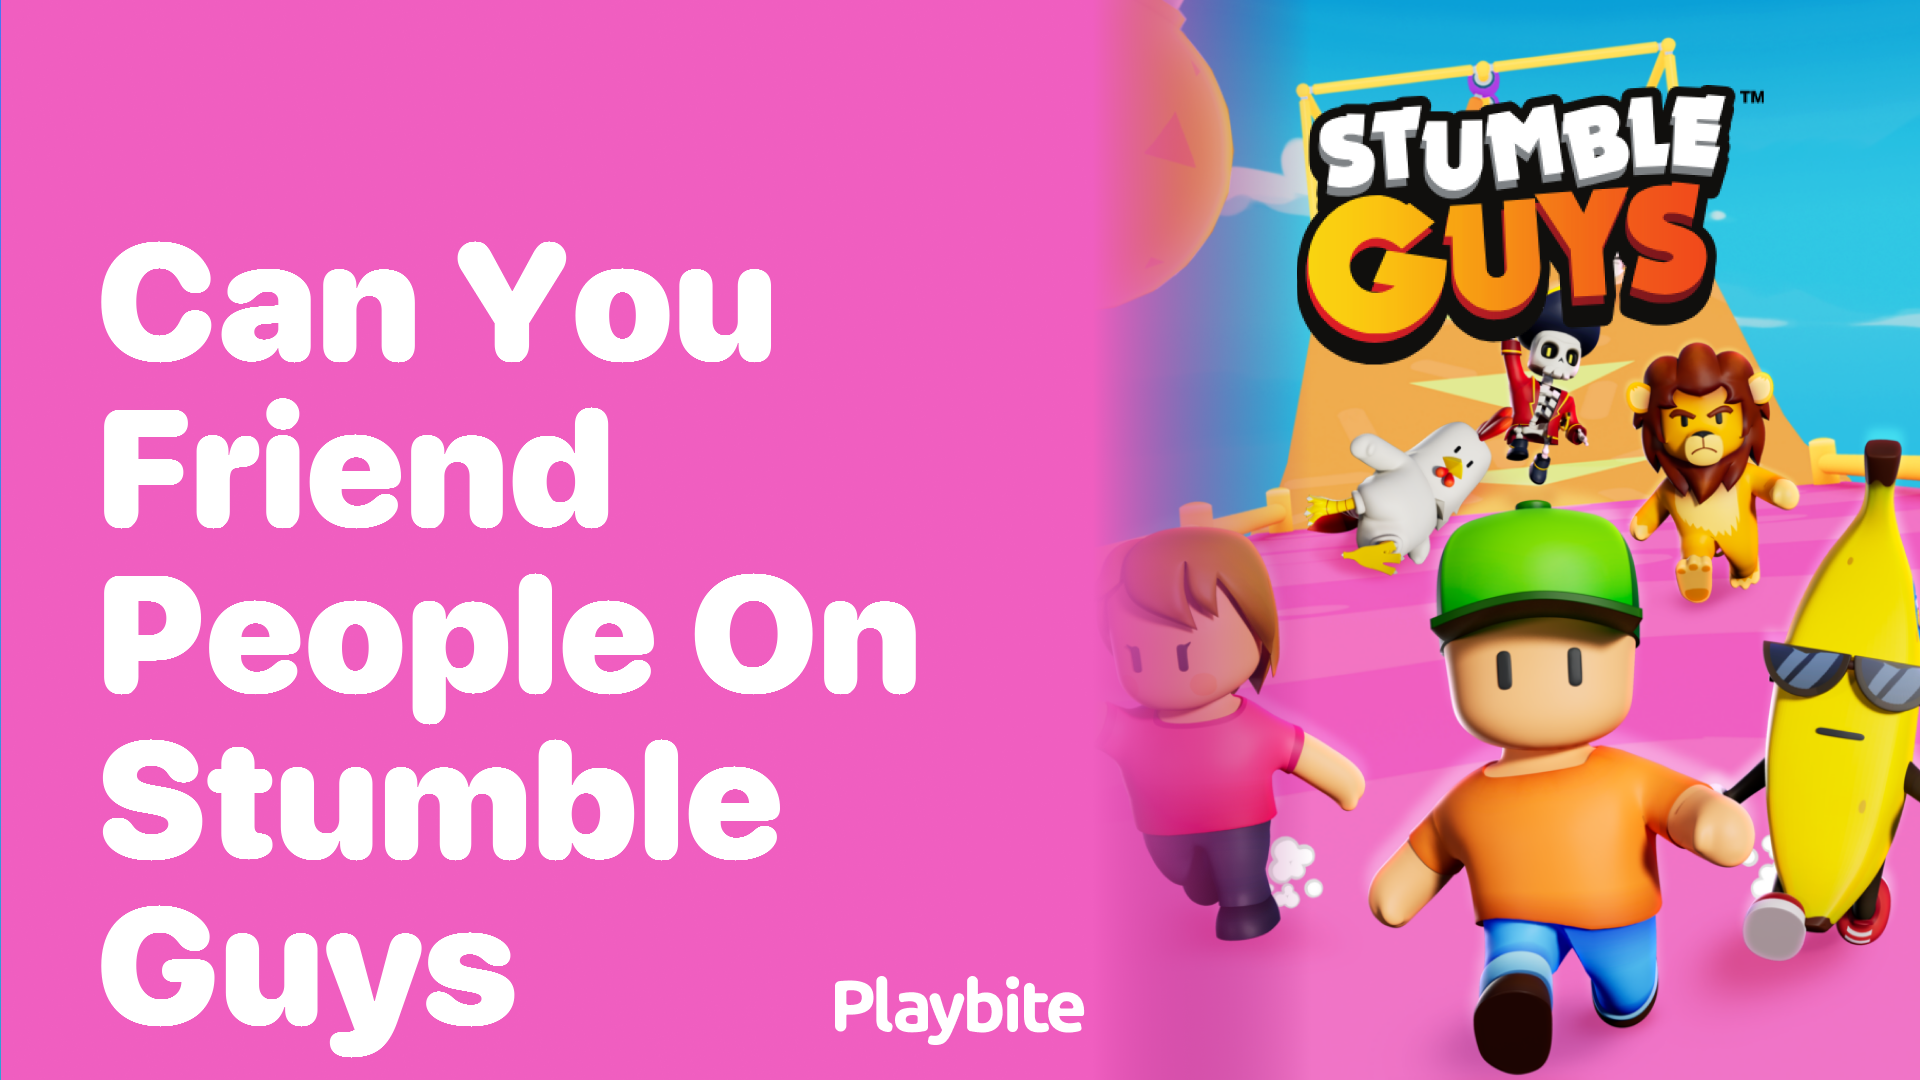 Can You Friend People on Stumble Guys? Here&#8217;s What You Need to Know